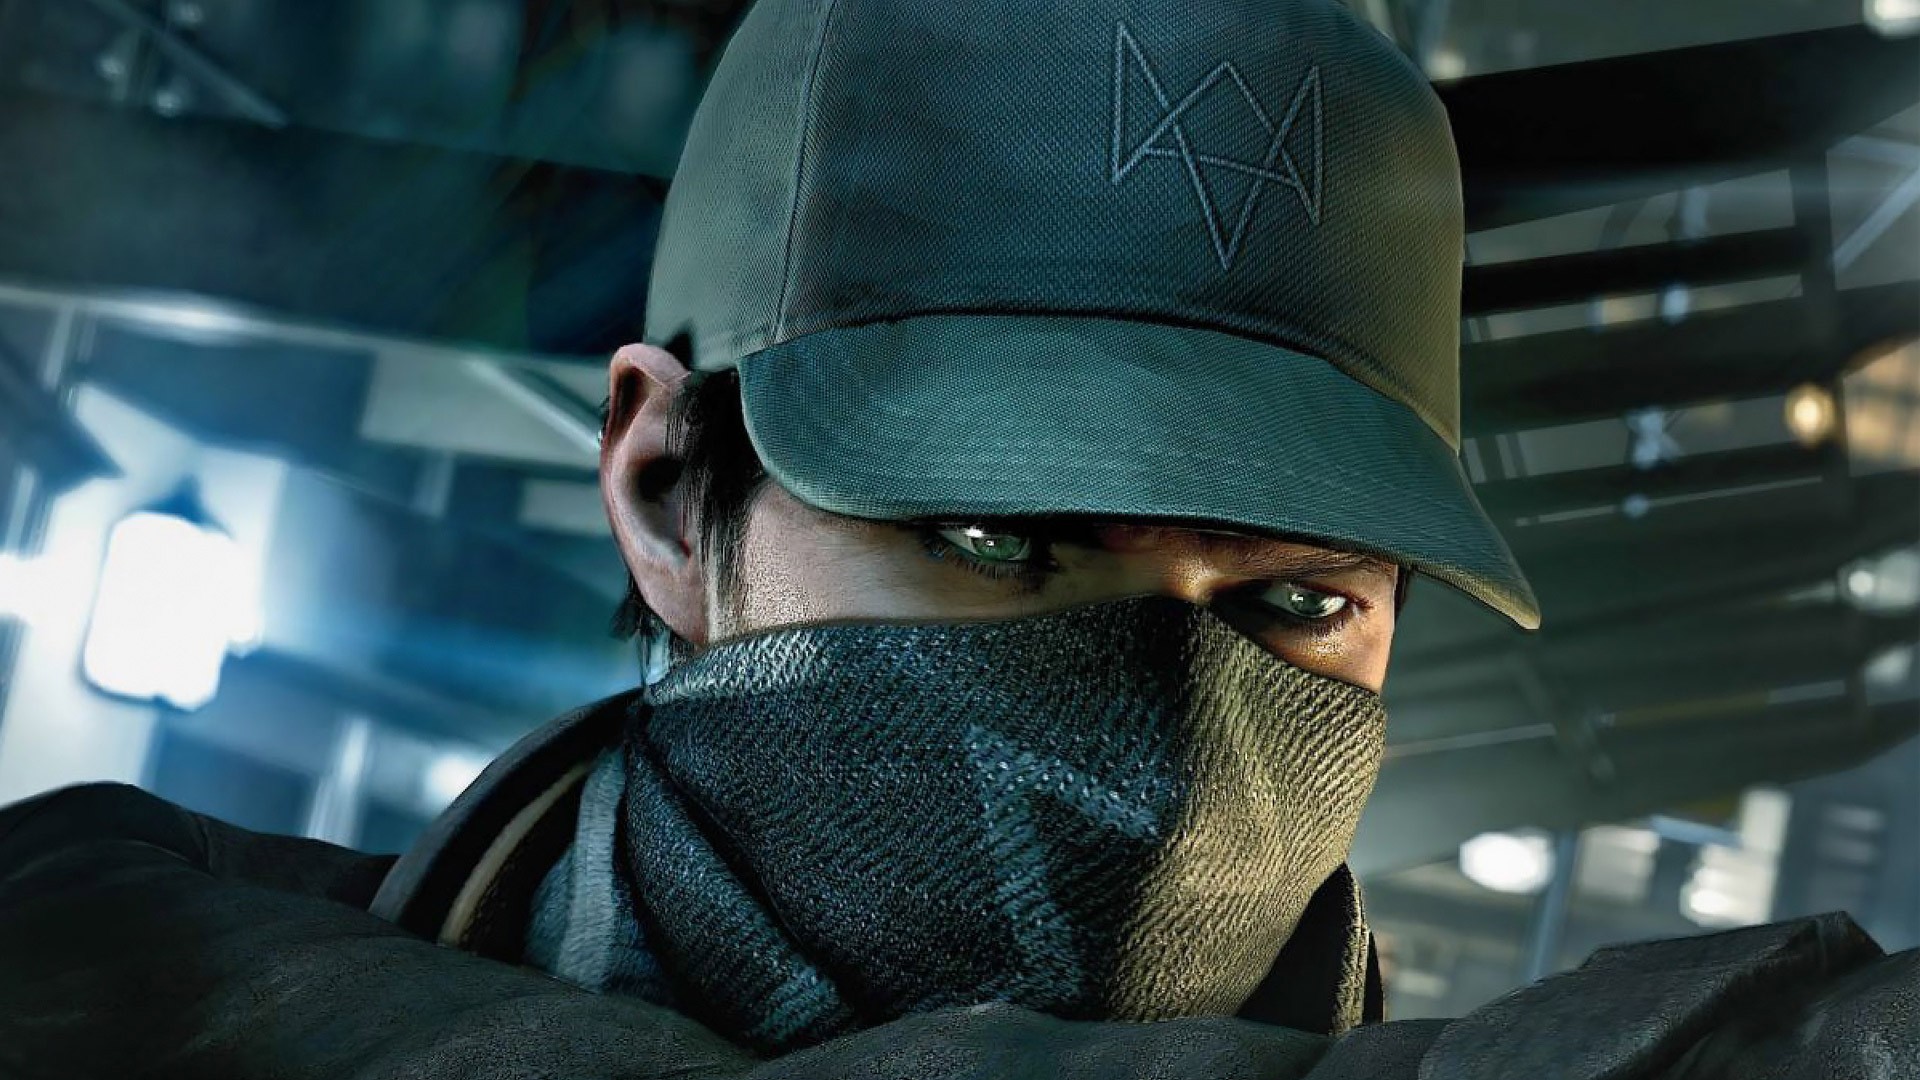 General 1920x1080 video games Watch_Dogs Aiden Pearce video game men hat mask Ubisoft video game characters